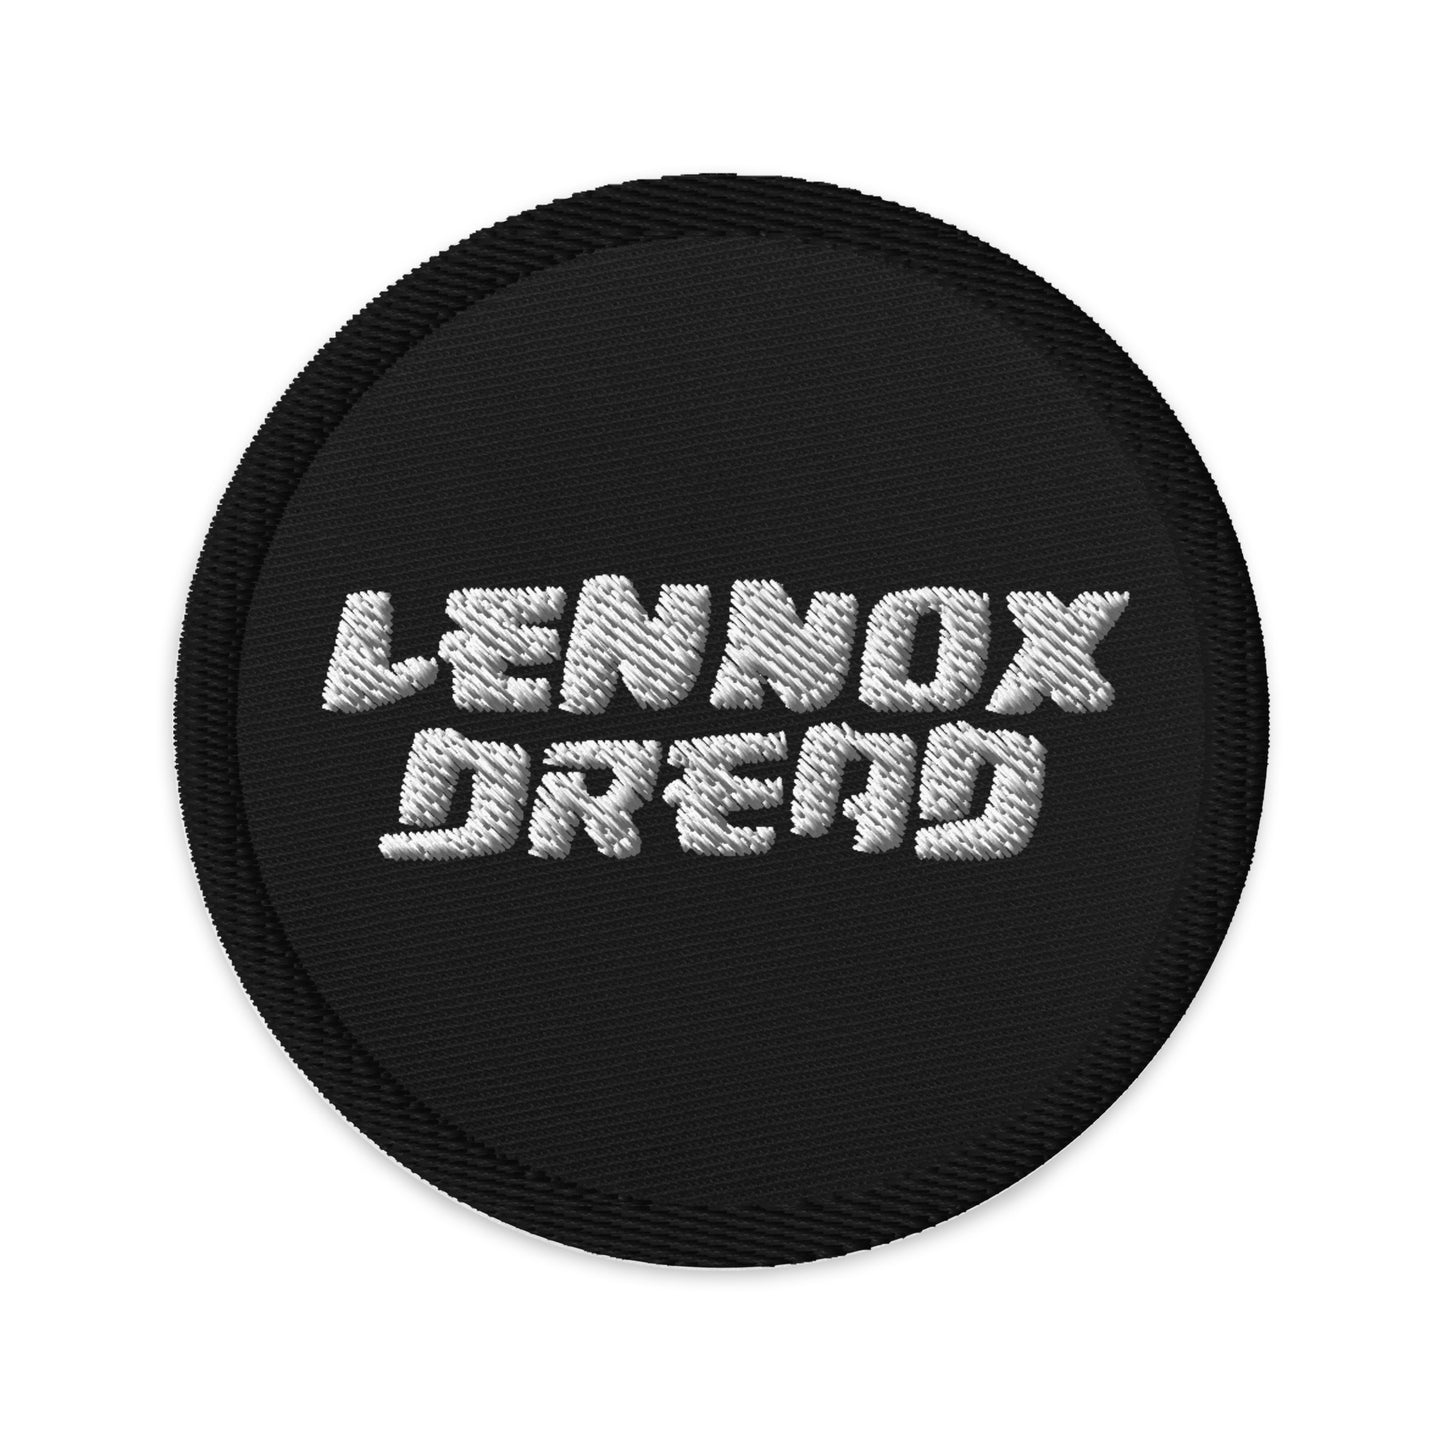 Lennox Dread Logo - Embroidered patches